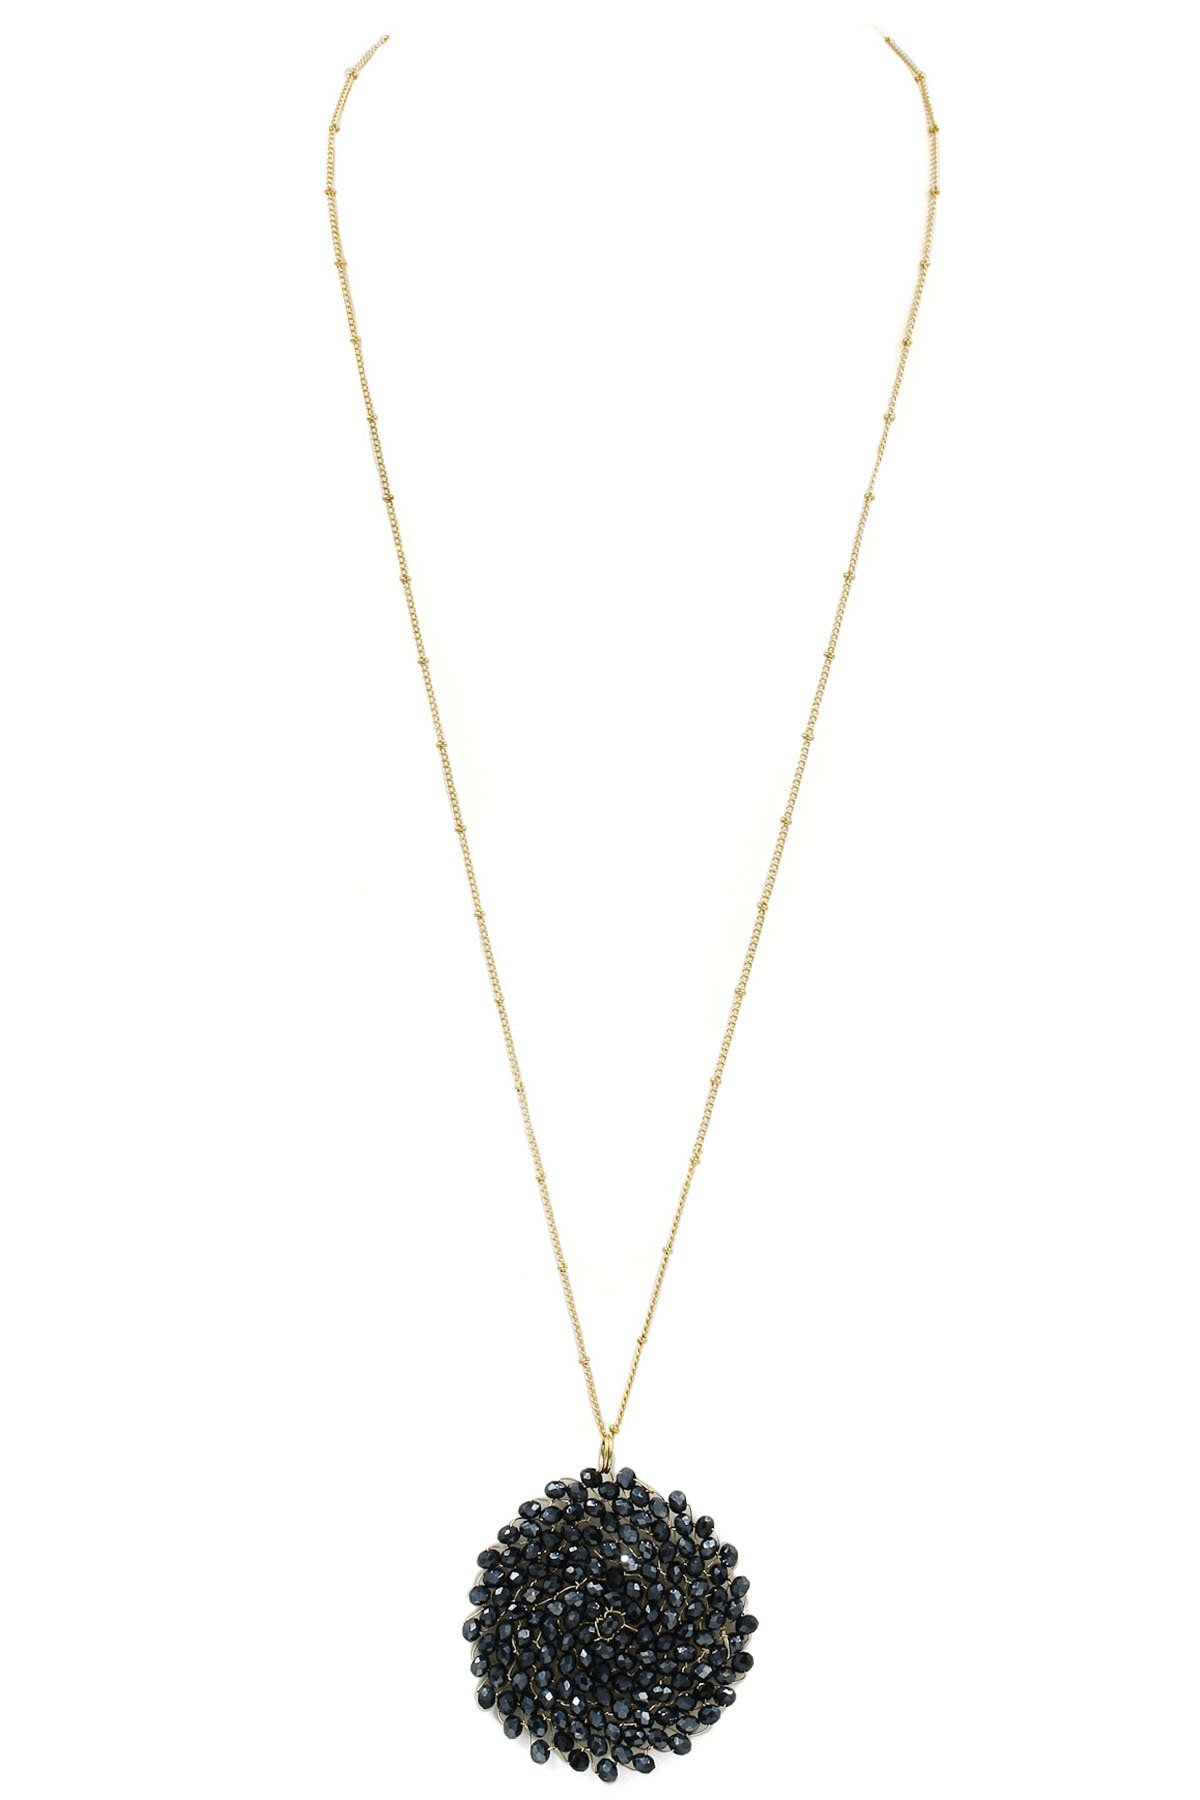 GOLD-BLACK Glass Bead Cluster Necklace - Necklaces